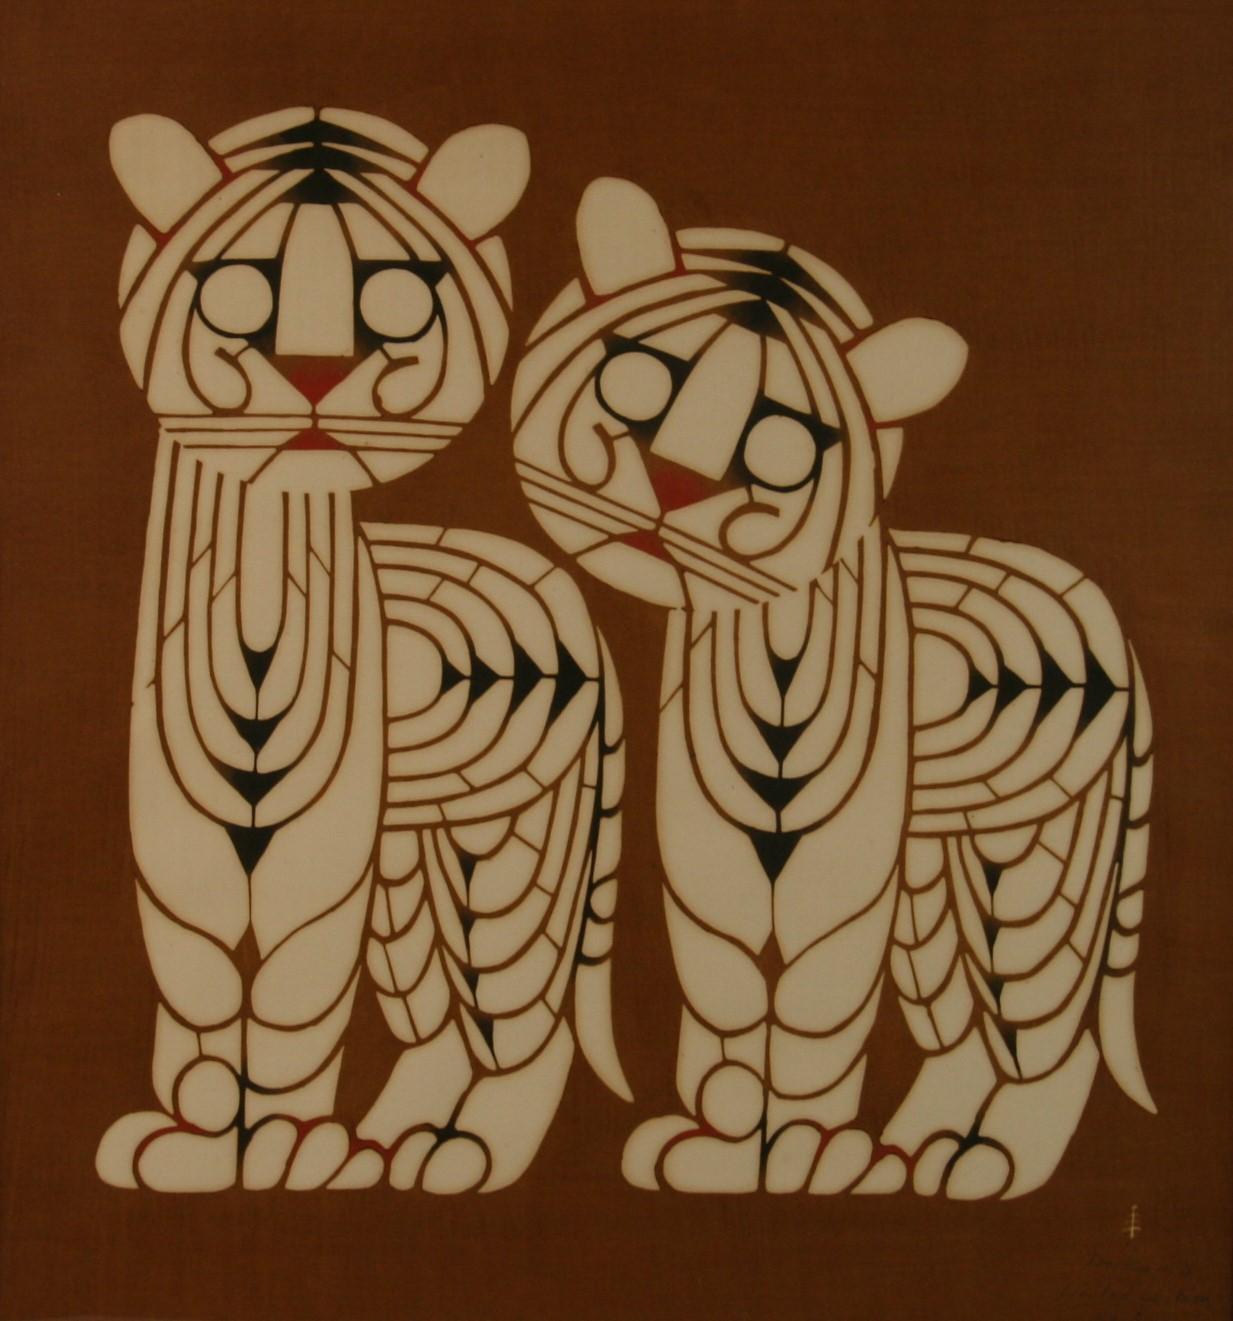 Unknown Animal Print - Japanese Two Tigers Serigraph #5 By Inikumo 1967